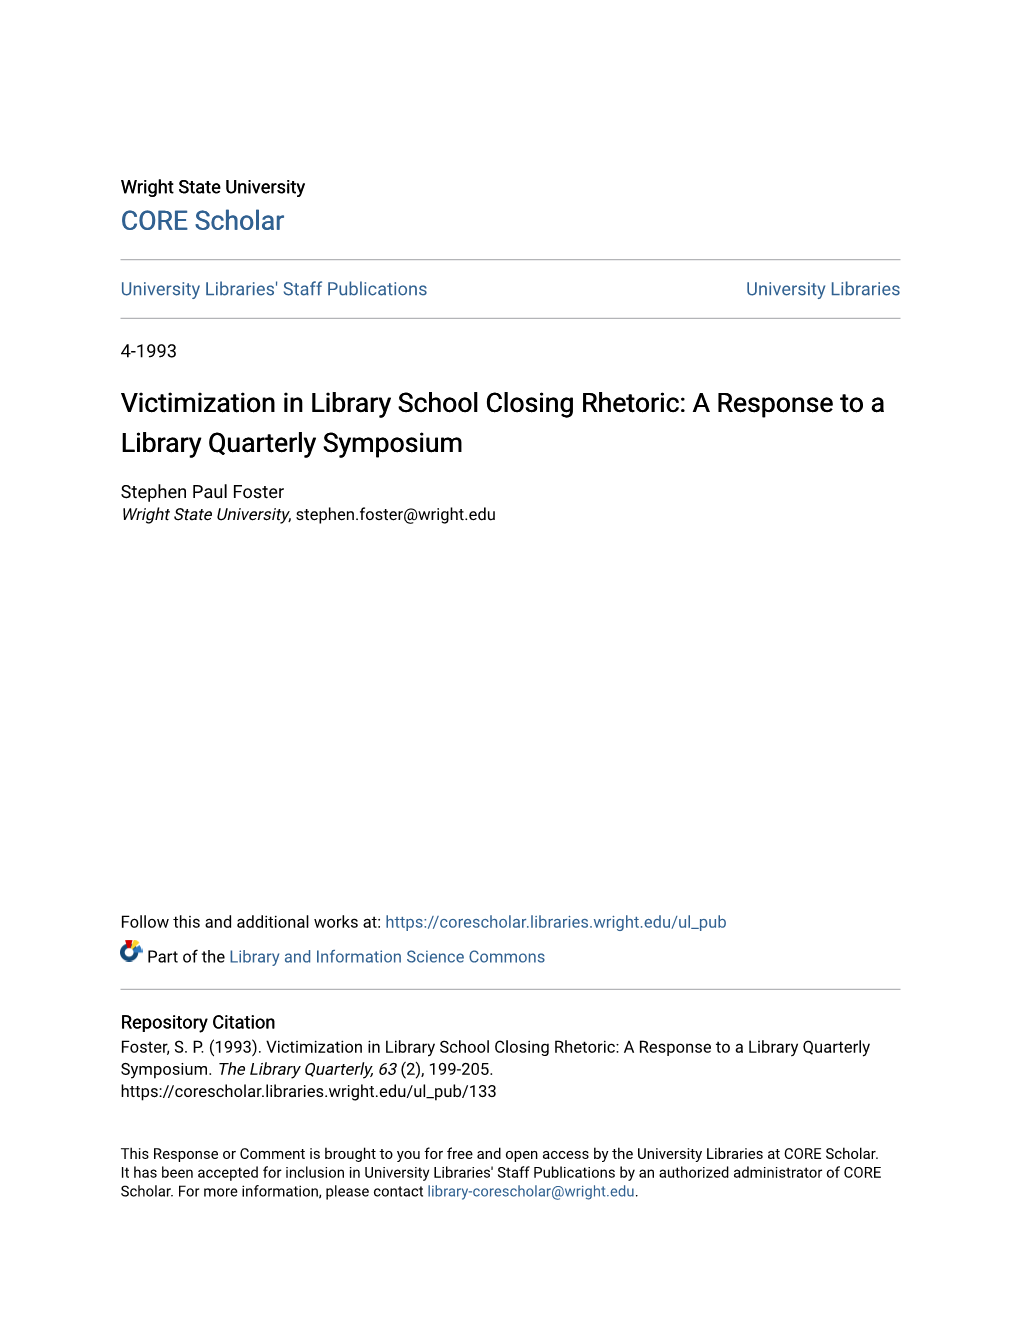 Victimization in Library School Closing Rhetoric: a Response to a Library Quarterly Symposium